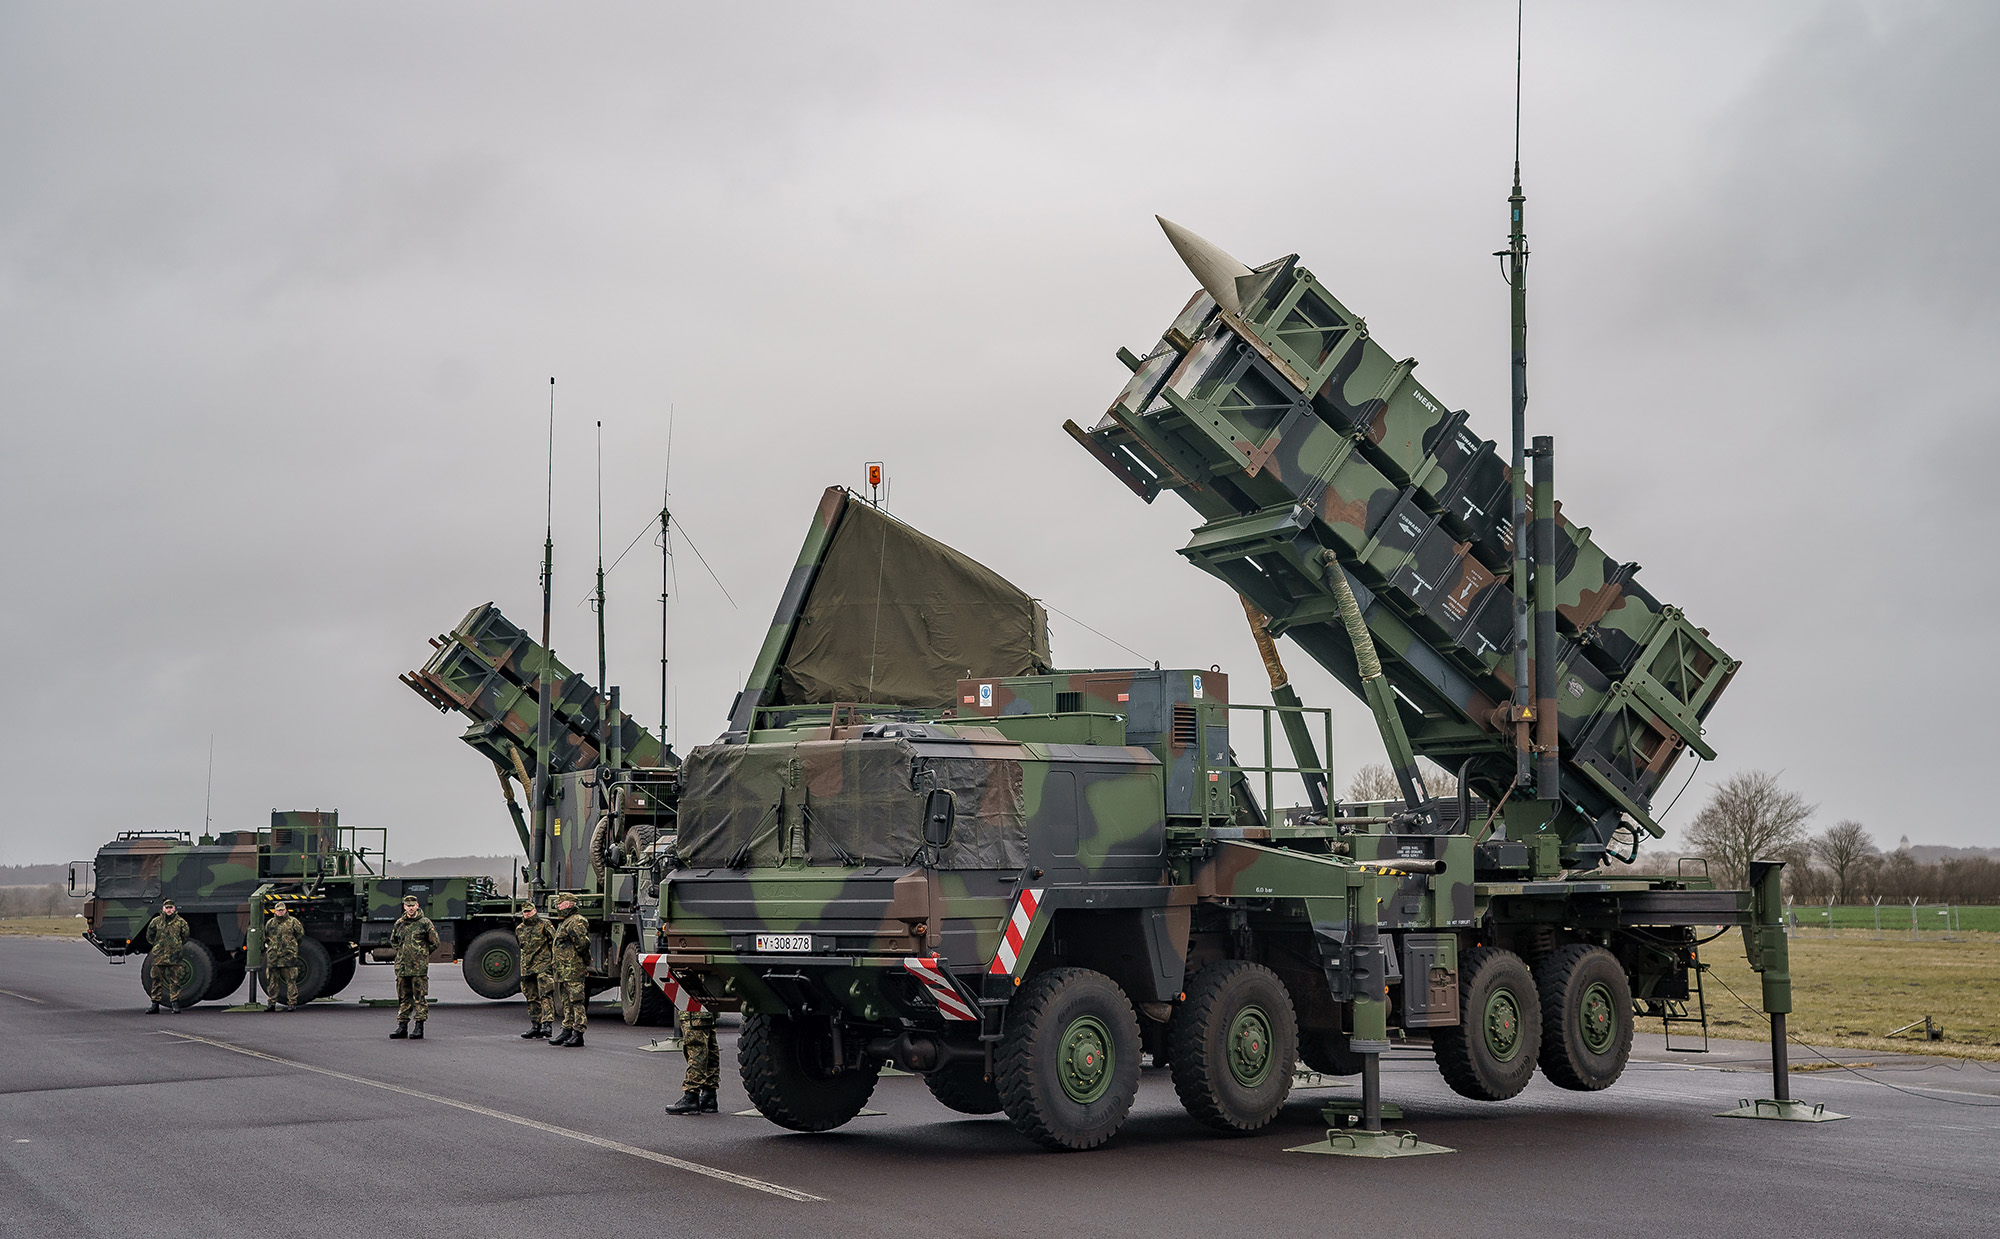 Patriot anti-aircraft missile systems of the Bundeswehr's anti-aircraft missile squadron 1 stand on the airfield of Schwesing Military Airport, Germany, March 17.